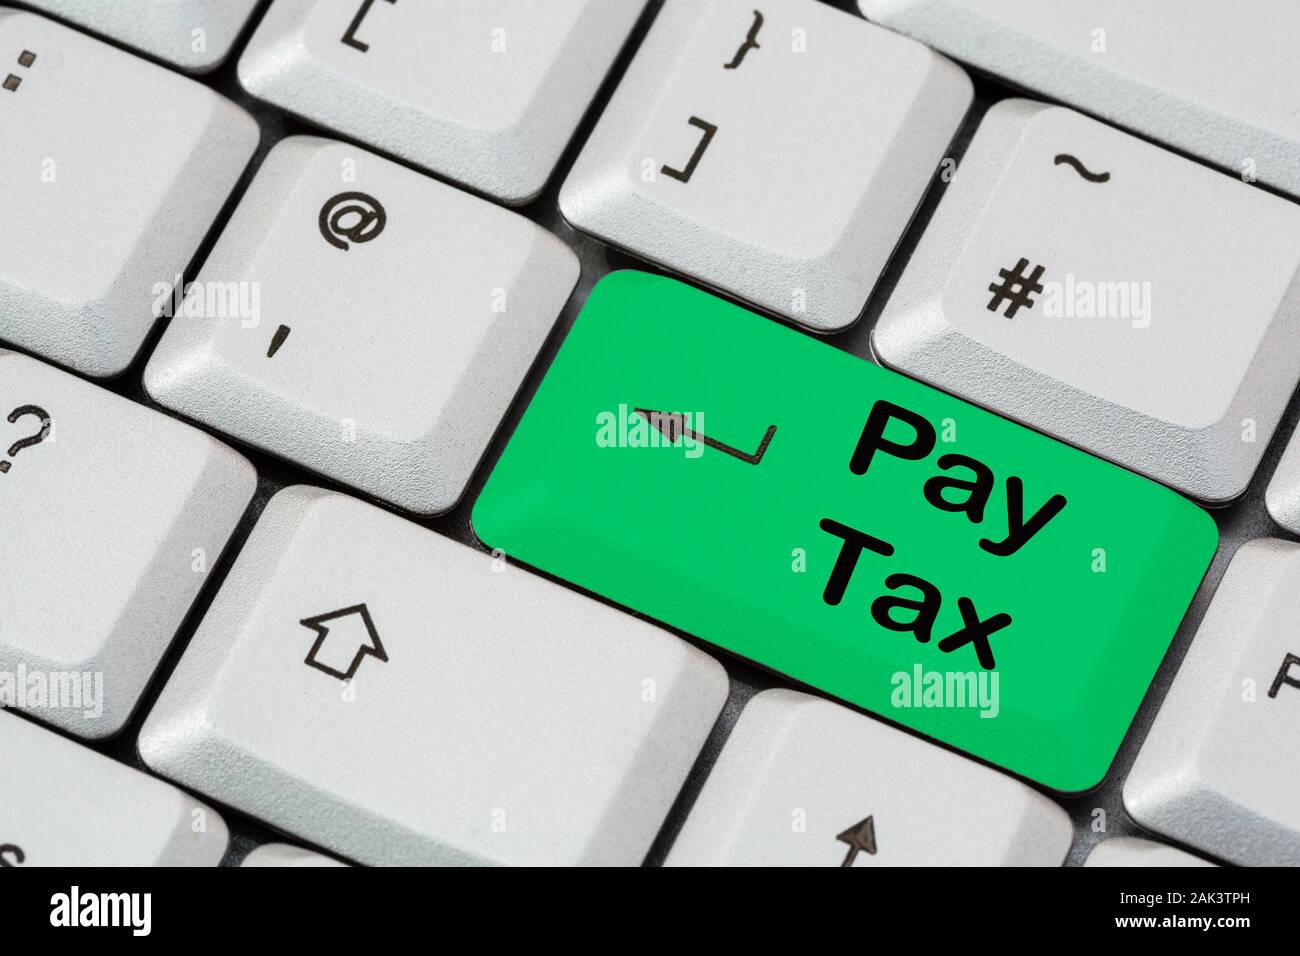 A keyboard with Pay Tax written in black lettering on a green enter key. Paying taxes self assessment concept. England, UK, Britain Stock Photo